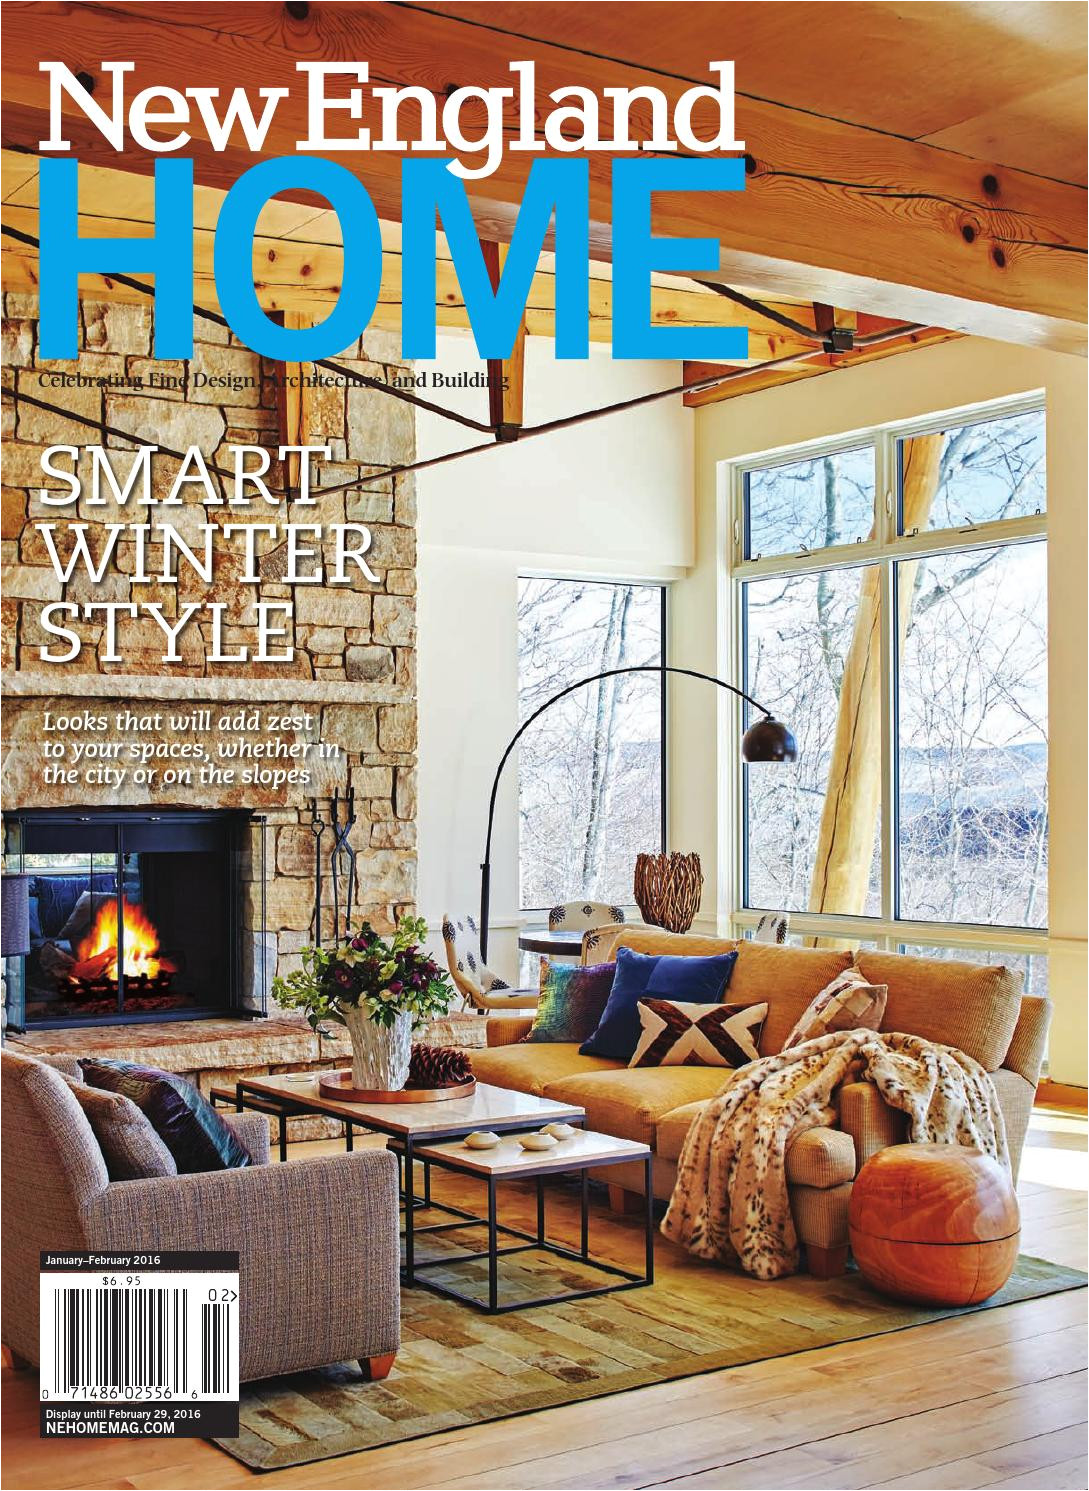 A Night to Remember Lexington Mi Bed and Breakfast New England Home Jan Feb 2016 by New England Home Magazine Llc issuu